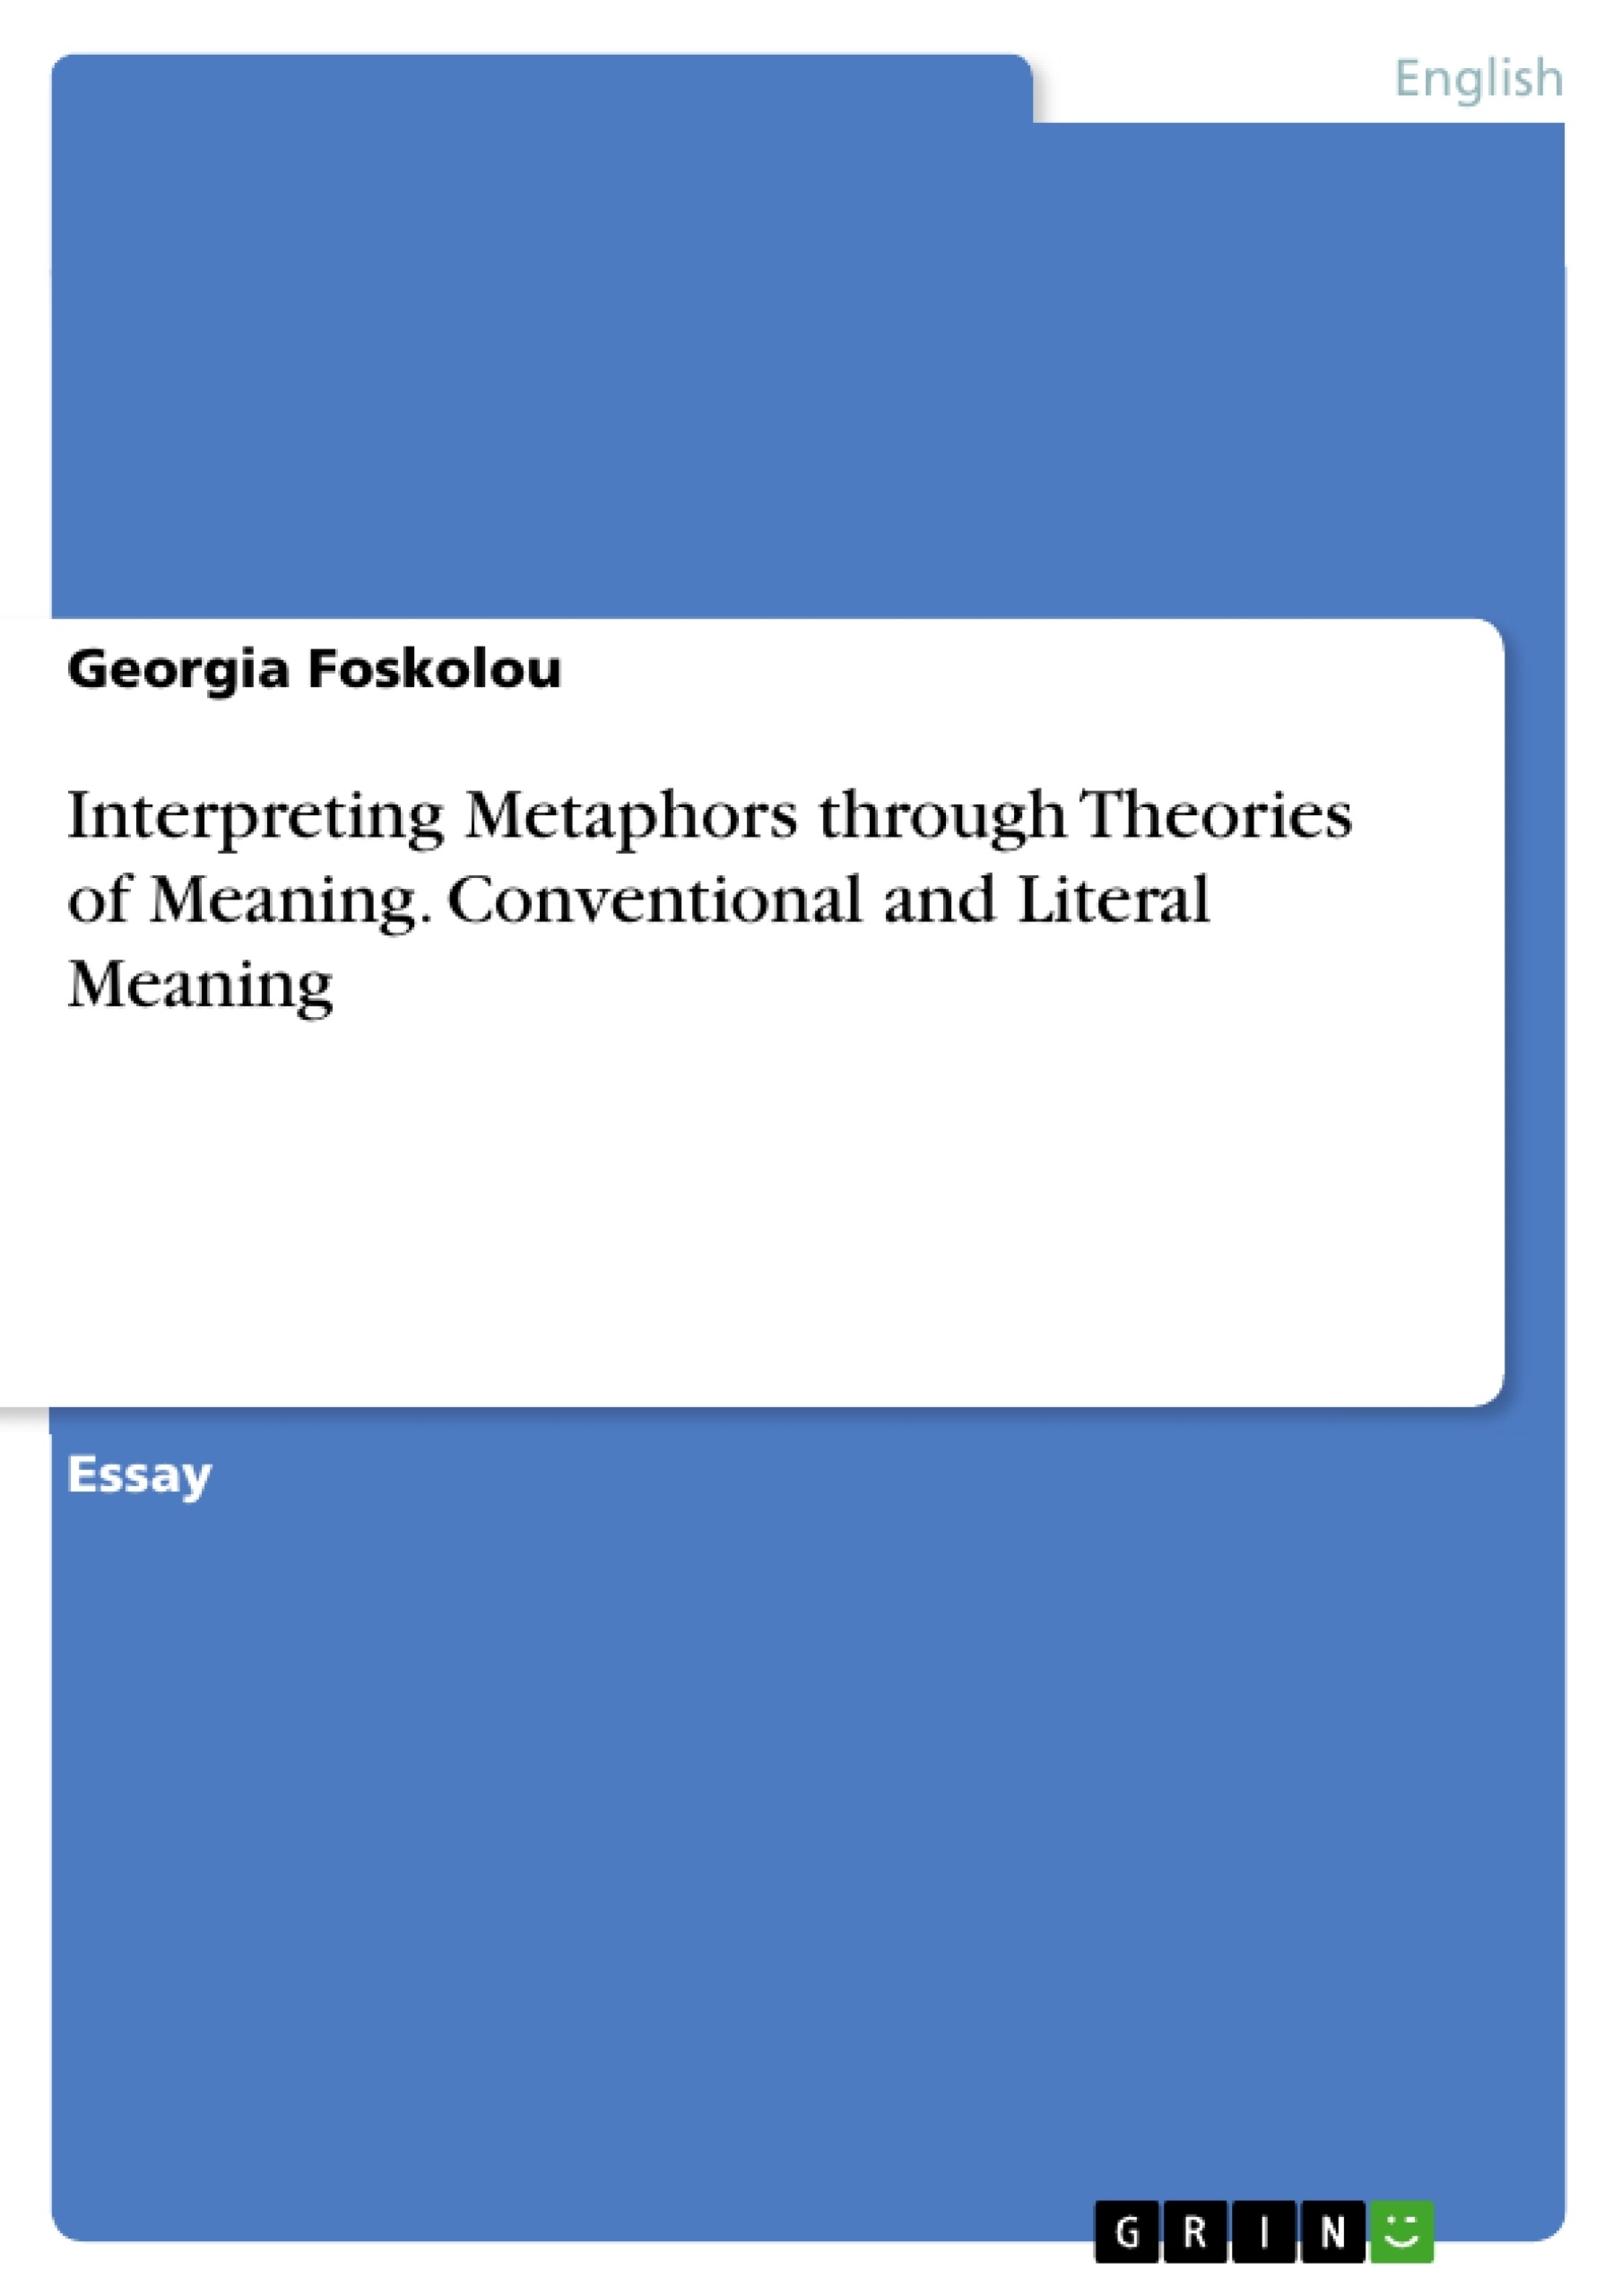 Titel: Interpreting Metaphors through Theories of Meaning. Conventional and Literal Meaning